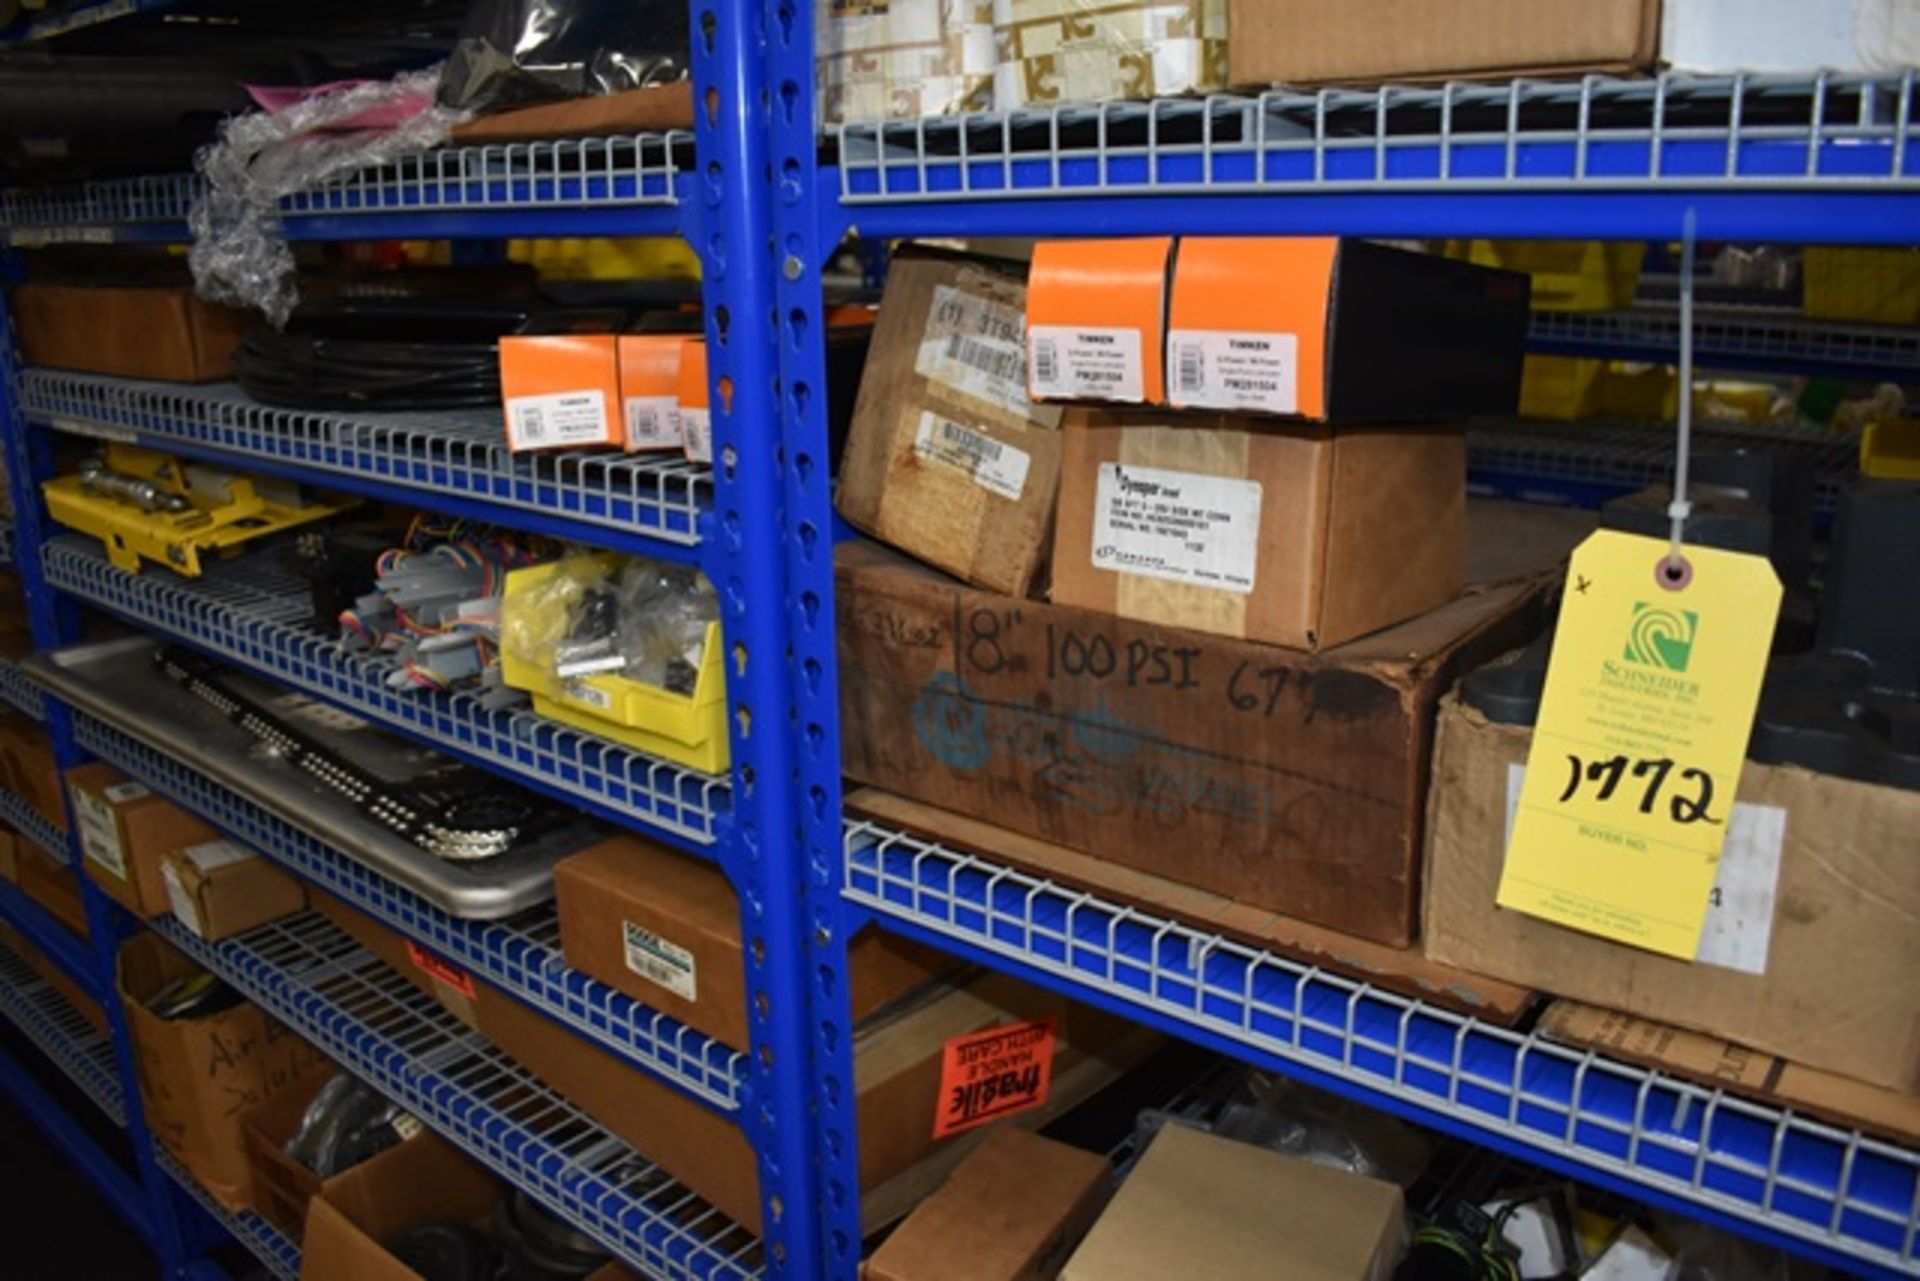 Contents of Blue Fastenal shelving including: V-belts, carlock, conveyor parts, etc. Five rows of - Image 2 of 2